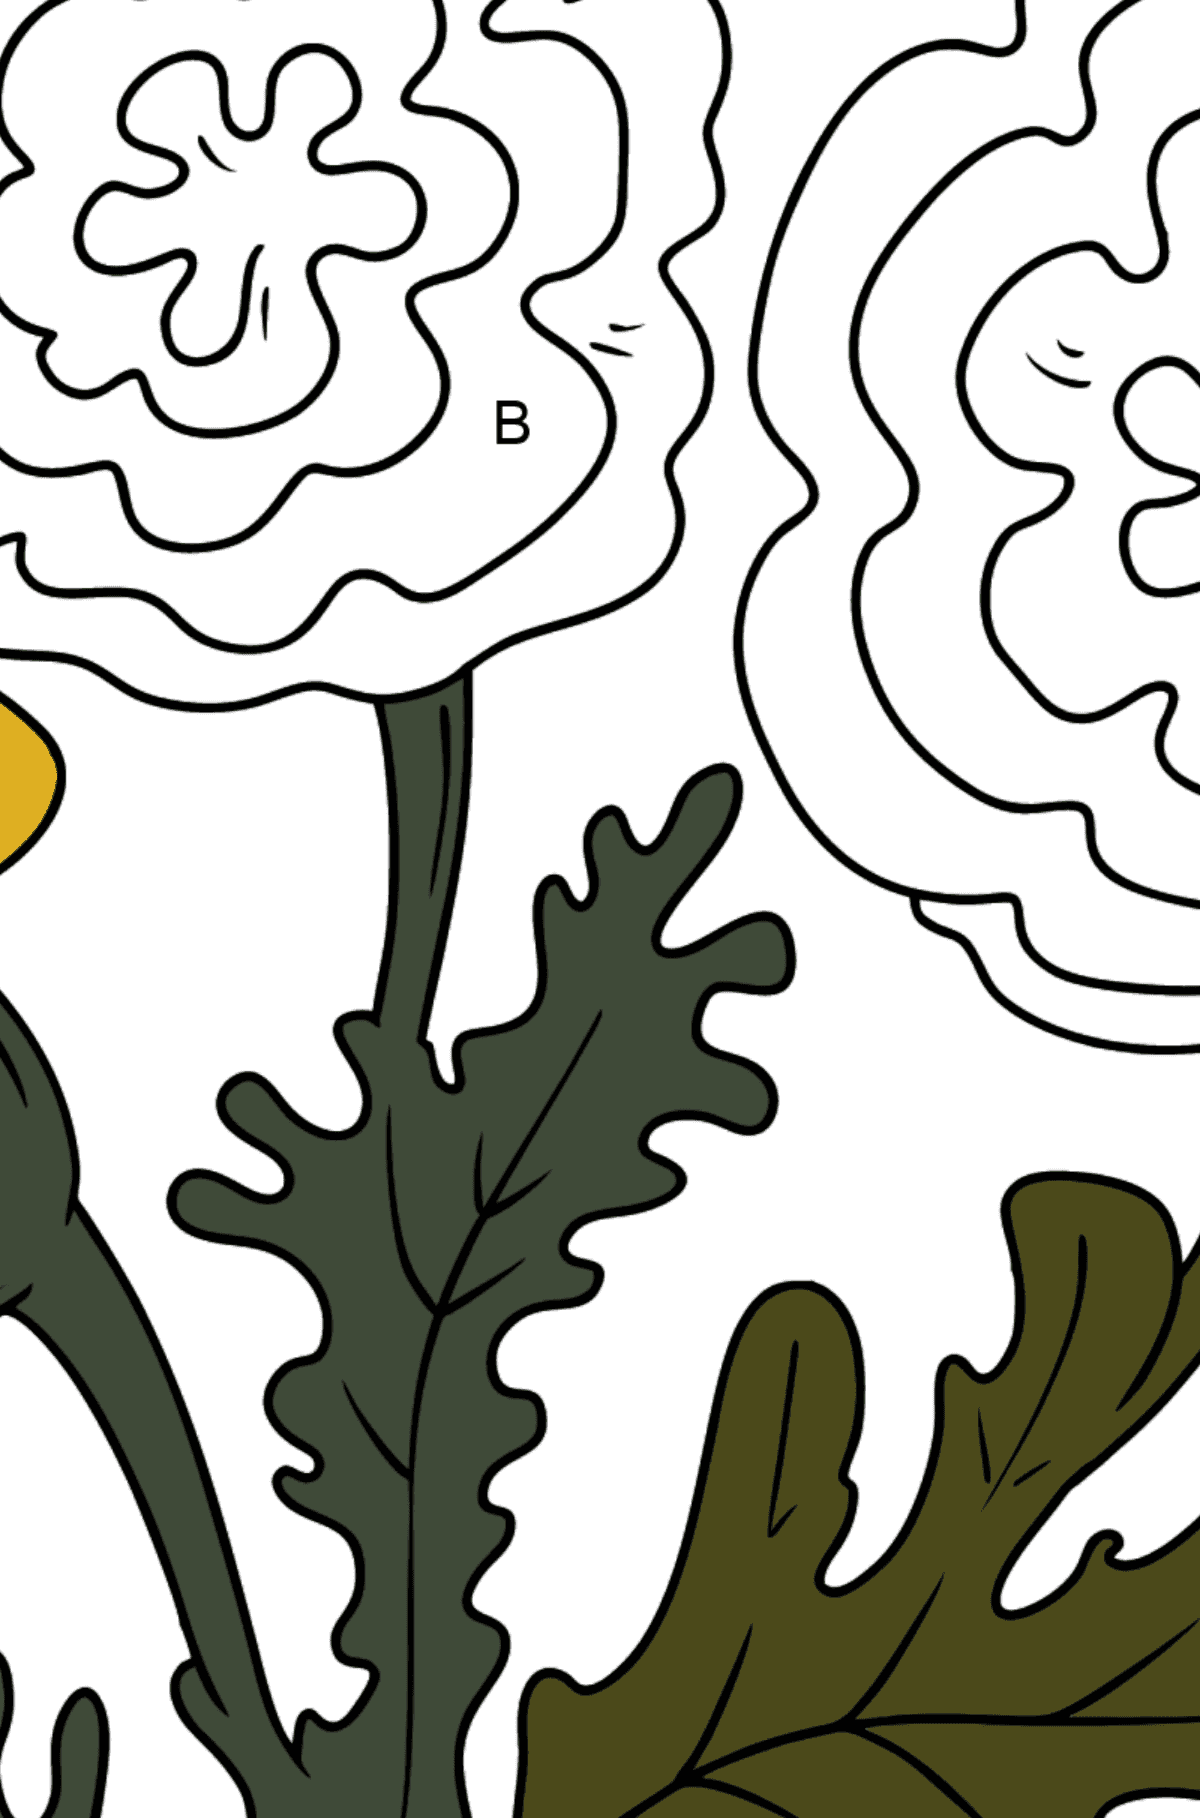 Coloring Page - Autumn flowers - Coloring by Letters for Kids